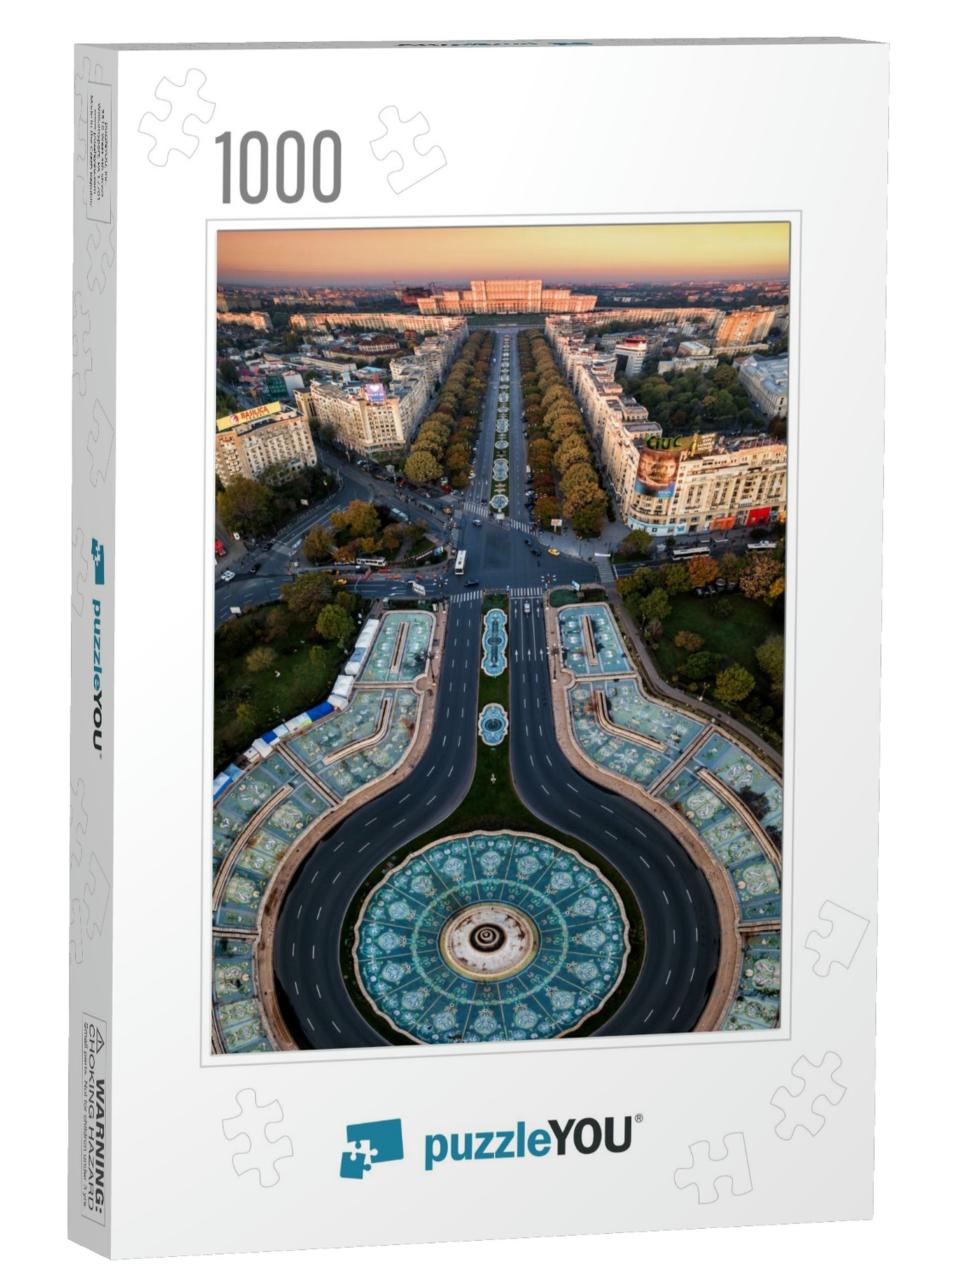 Bucharest Capital City of Romania... Jigsaw Puzzle with 1000 pieces